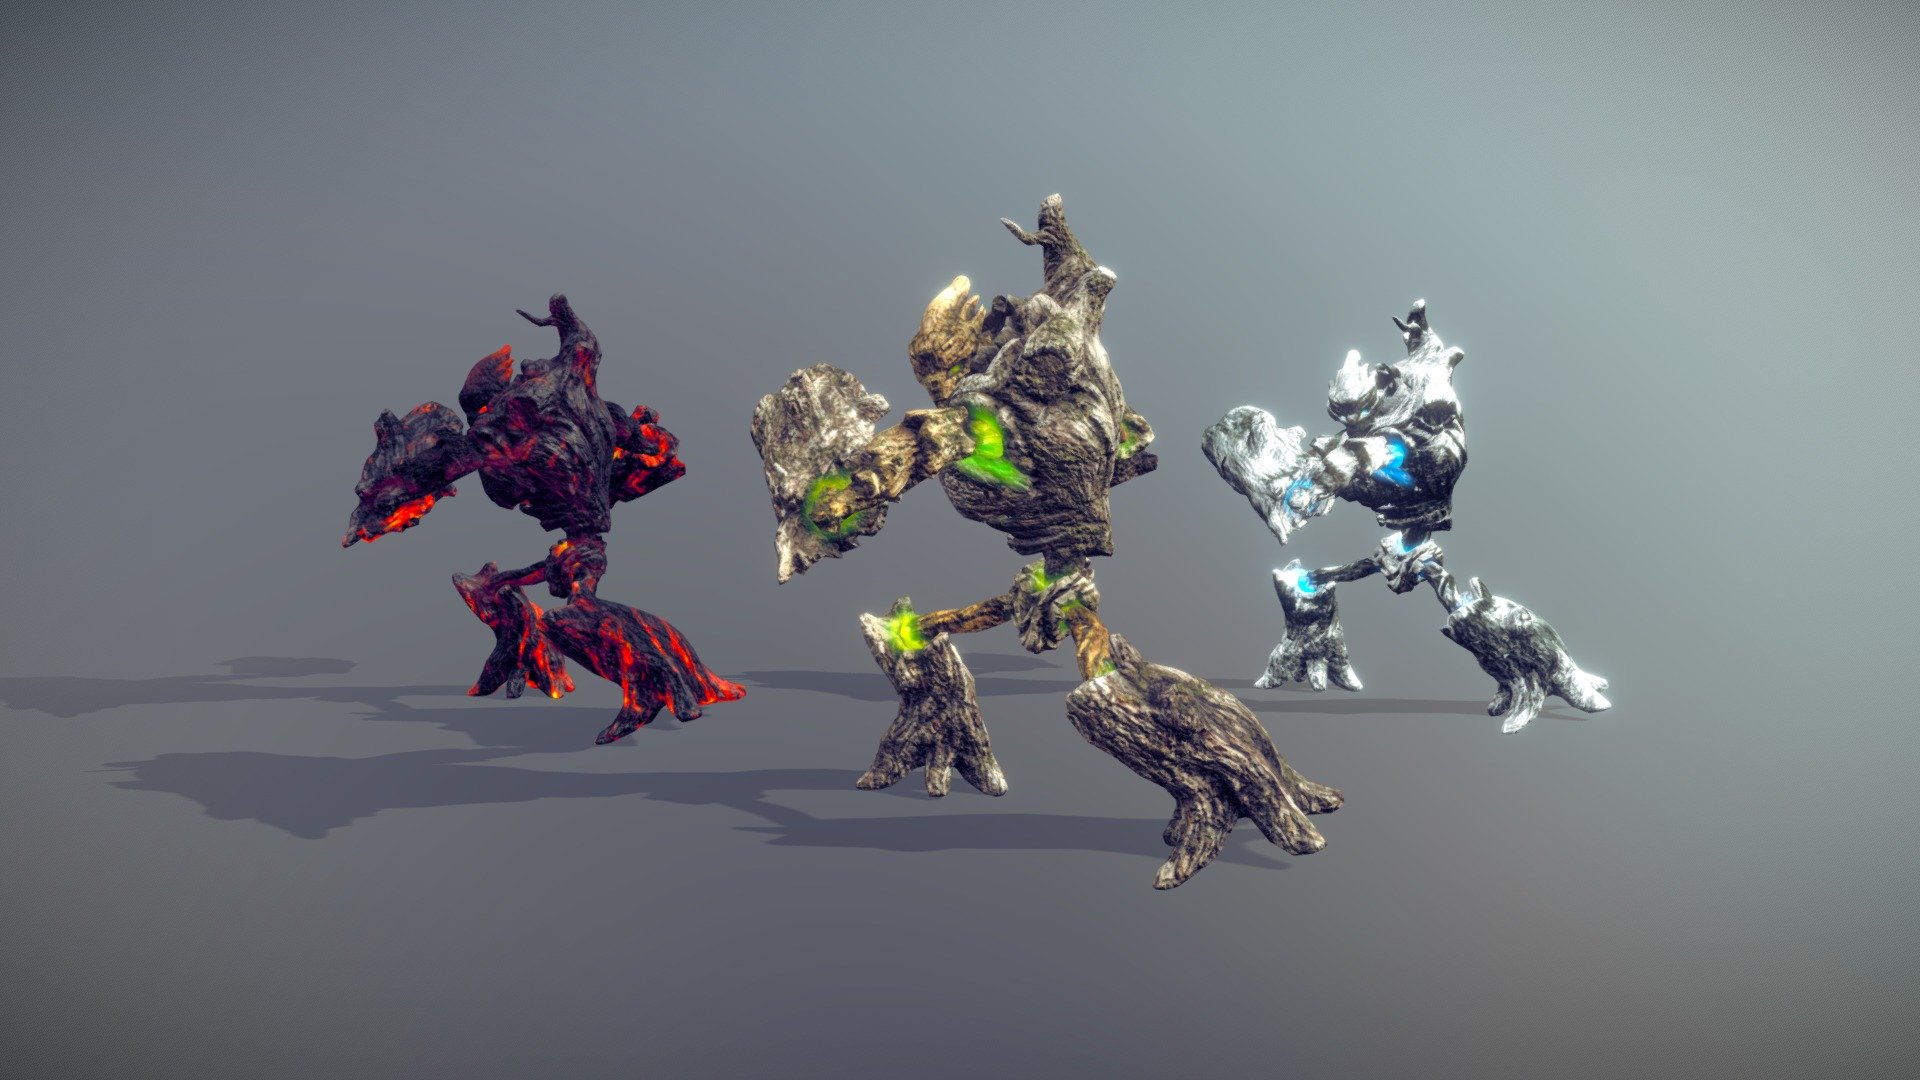 Forest Golems #2 to Populate your fantasy world.

It is part of a Pack of 4 Forset Golems Ready to be used on any Game Engine (Unity, Unreal)


⭐IMPORTANT⭐


The Source files include the Entire Forest Collection so you need to buy it one



Check the Full Forest Golem Colection:
https://sketchfab.com/malbers.shark87/collections/forest-golems-by-malbers



If you need the Unreal and Unity Projects please write to me: malbers.shark87@gmail.com


ADDITIONAL LICENSE

The following custom license applies to this asset in addition to the EULA.

END USER will be prohibited from using the asset license for the following products:




Creation &amp; Trading of Non-Fungible-Tokens (NFT) and/or use in Blockchain-based projects or products.

Creation of content for Metaverse related and/or Game creation software and products.

3D printing for commercial use.

Remix, transform or build upon the material, and re-sell the modified material.
 - Forest Golems 02 - Buy Royalty Free 3D model by Malbers Animations (@malbers.shark87) 3d model